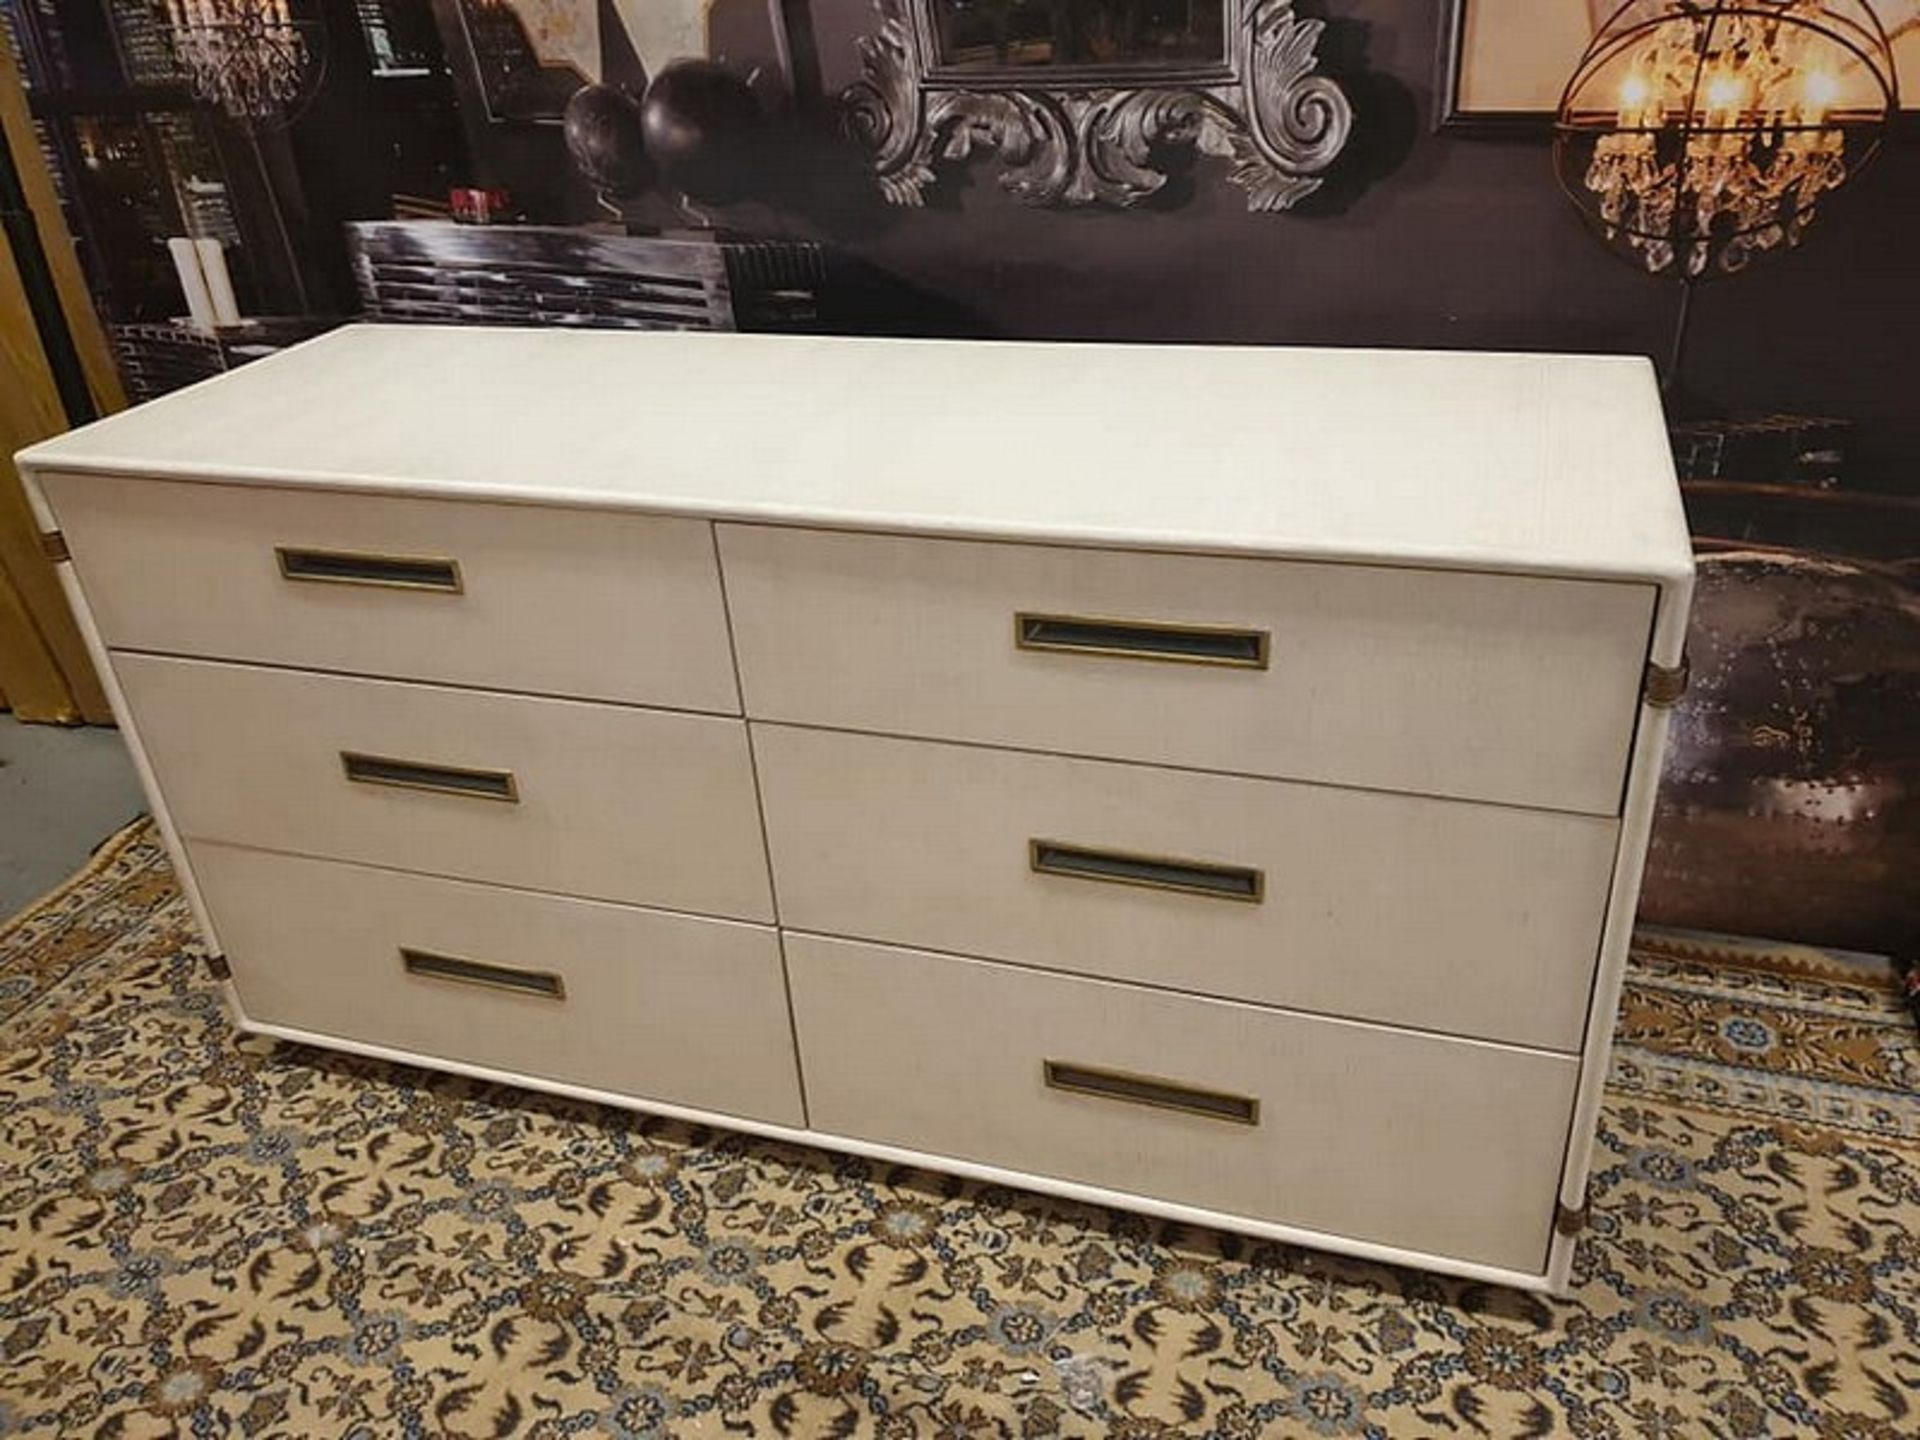 Starbay Campaign Furniture Natural Walnut And Sisal 6 Drawer Chest With Brass Inlay And Leather - Image 2 of 2